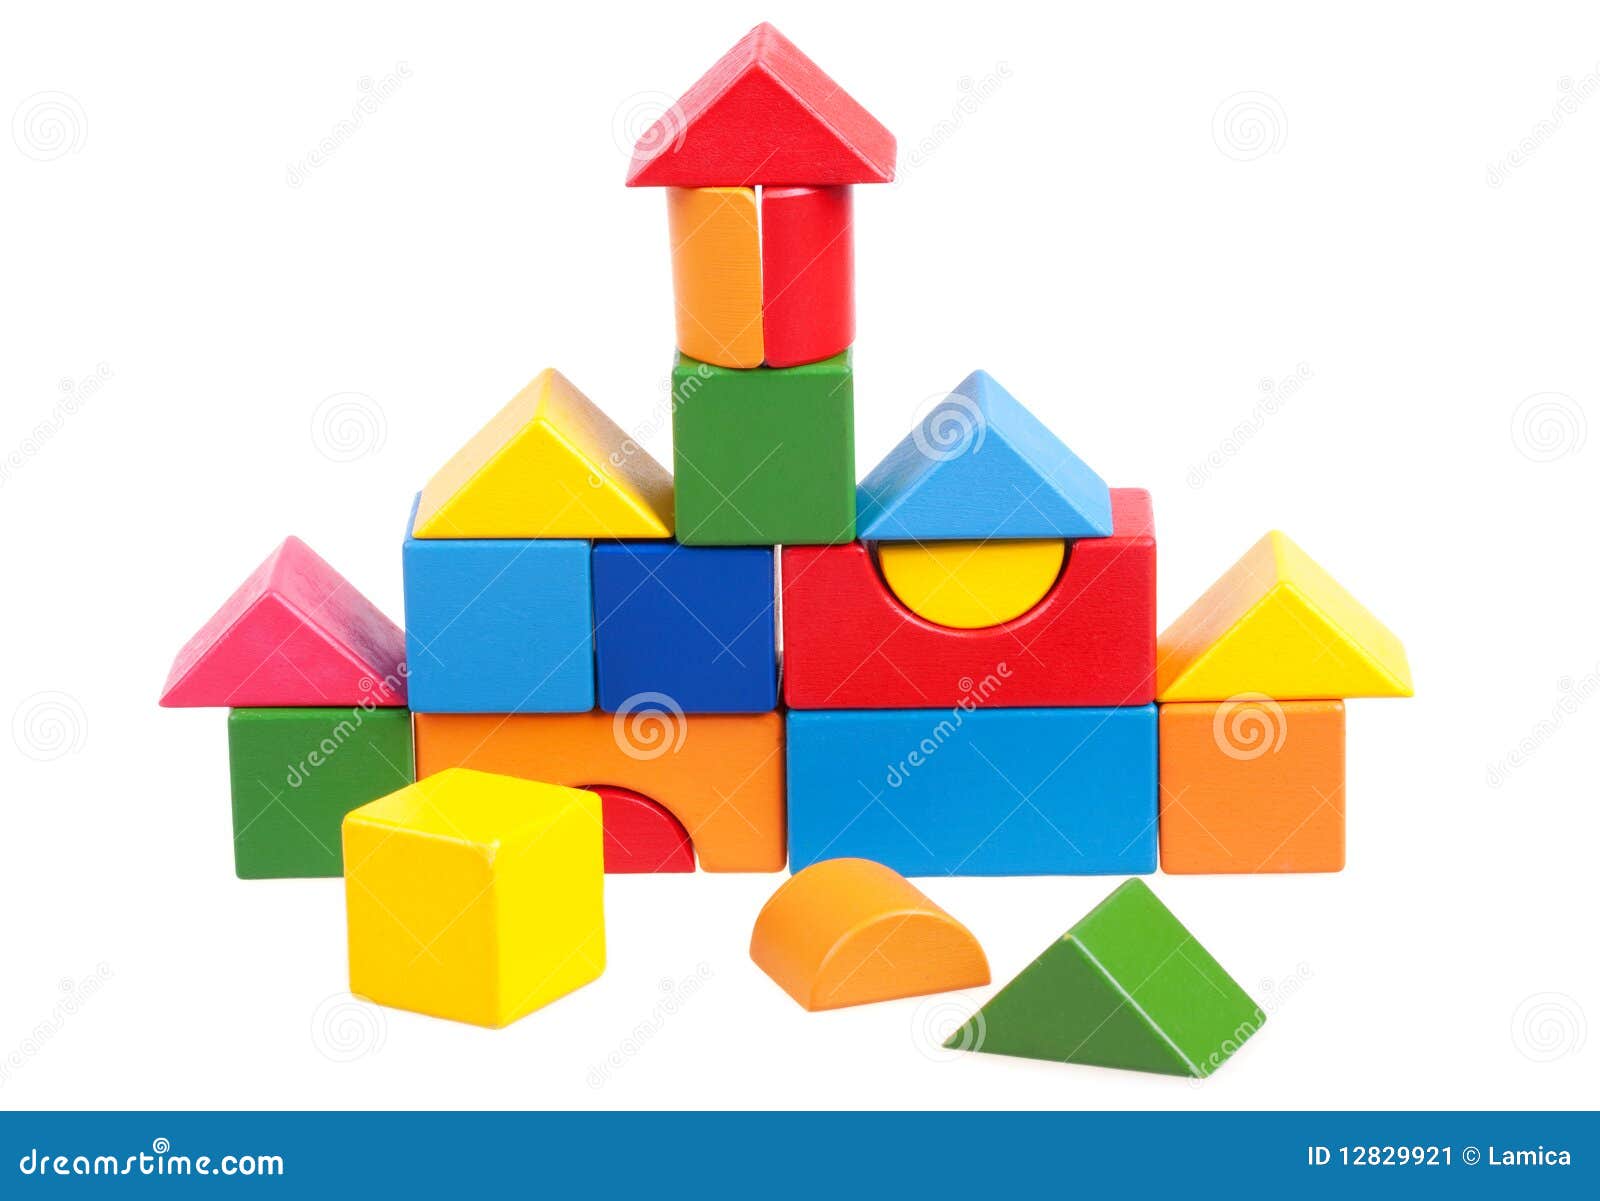 house constructed of blocks